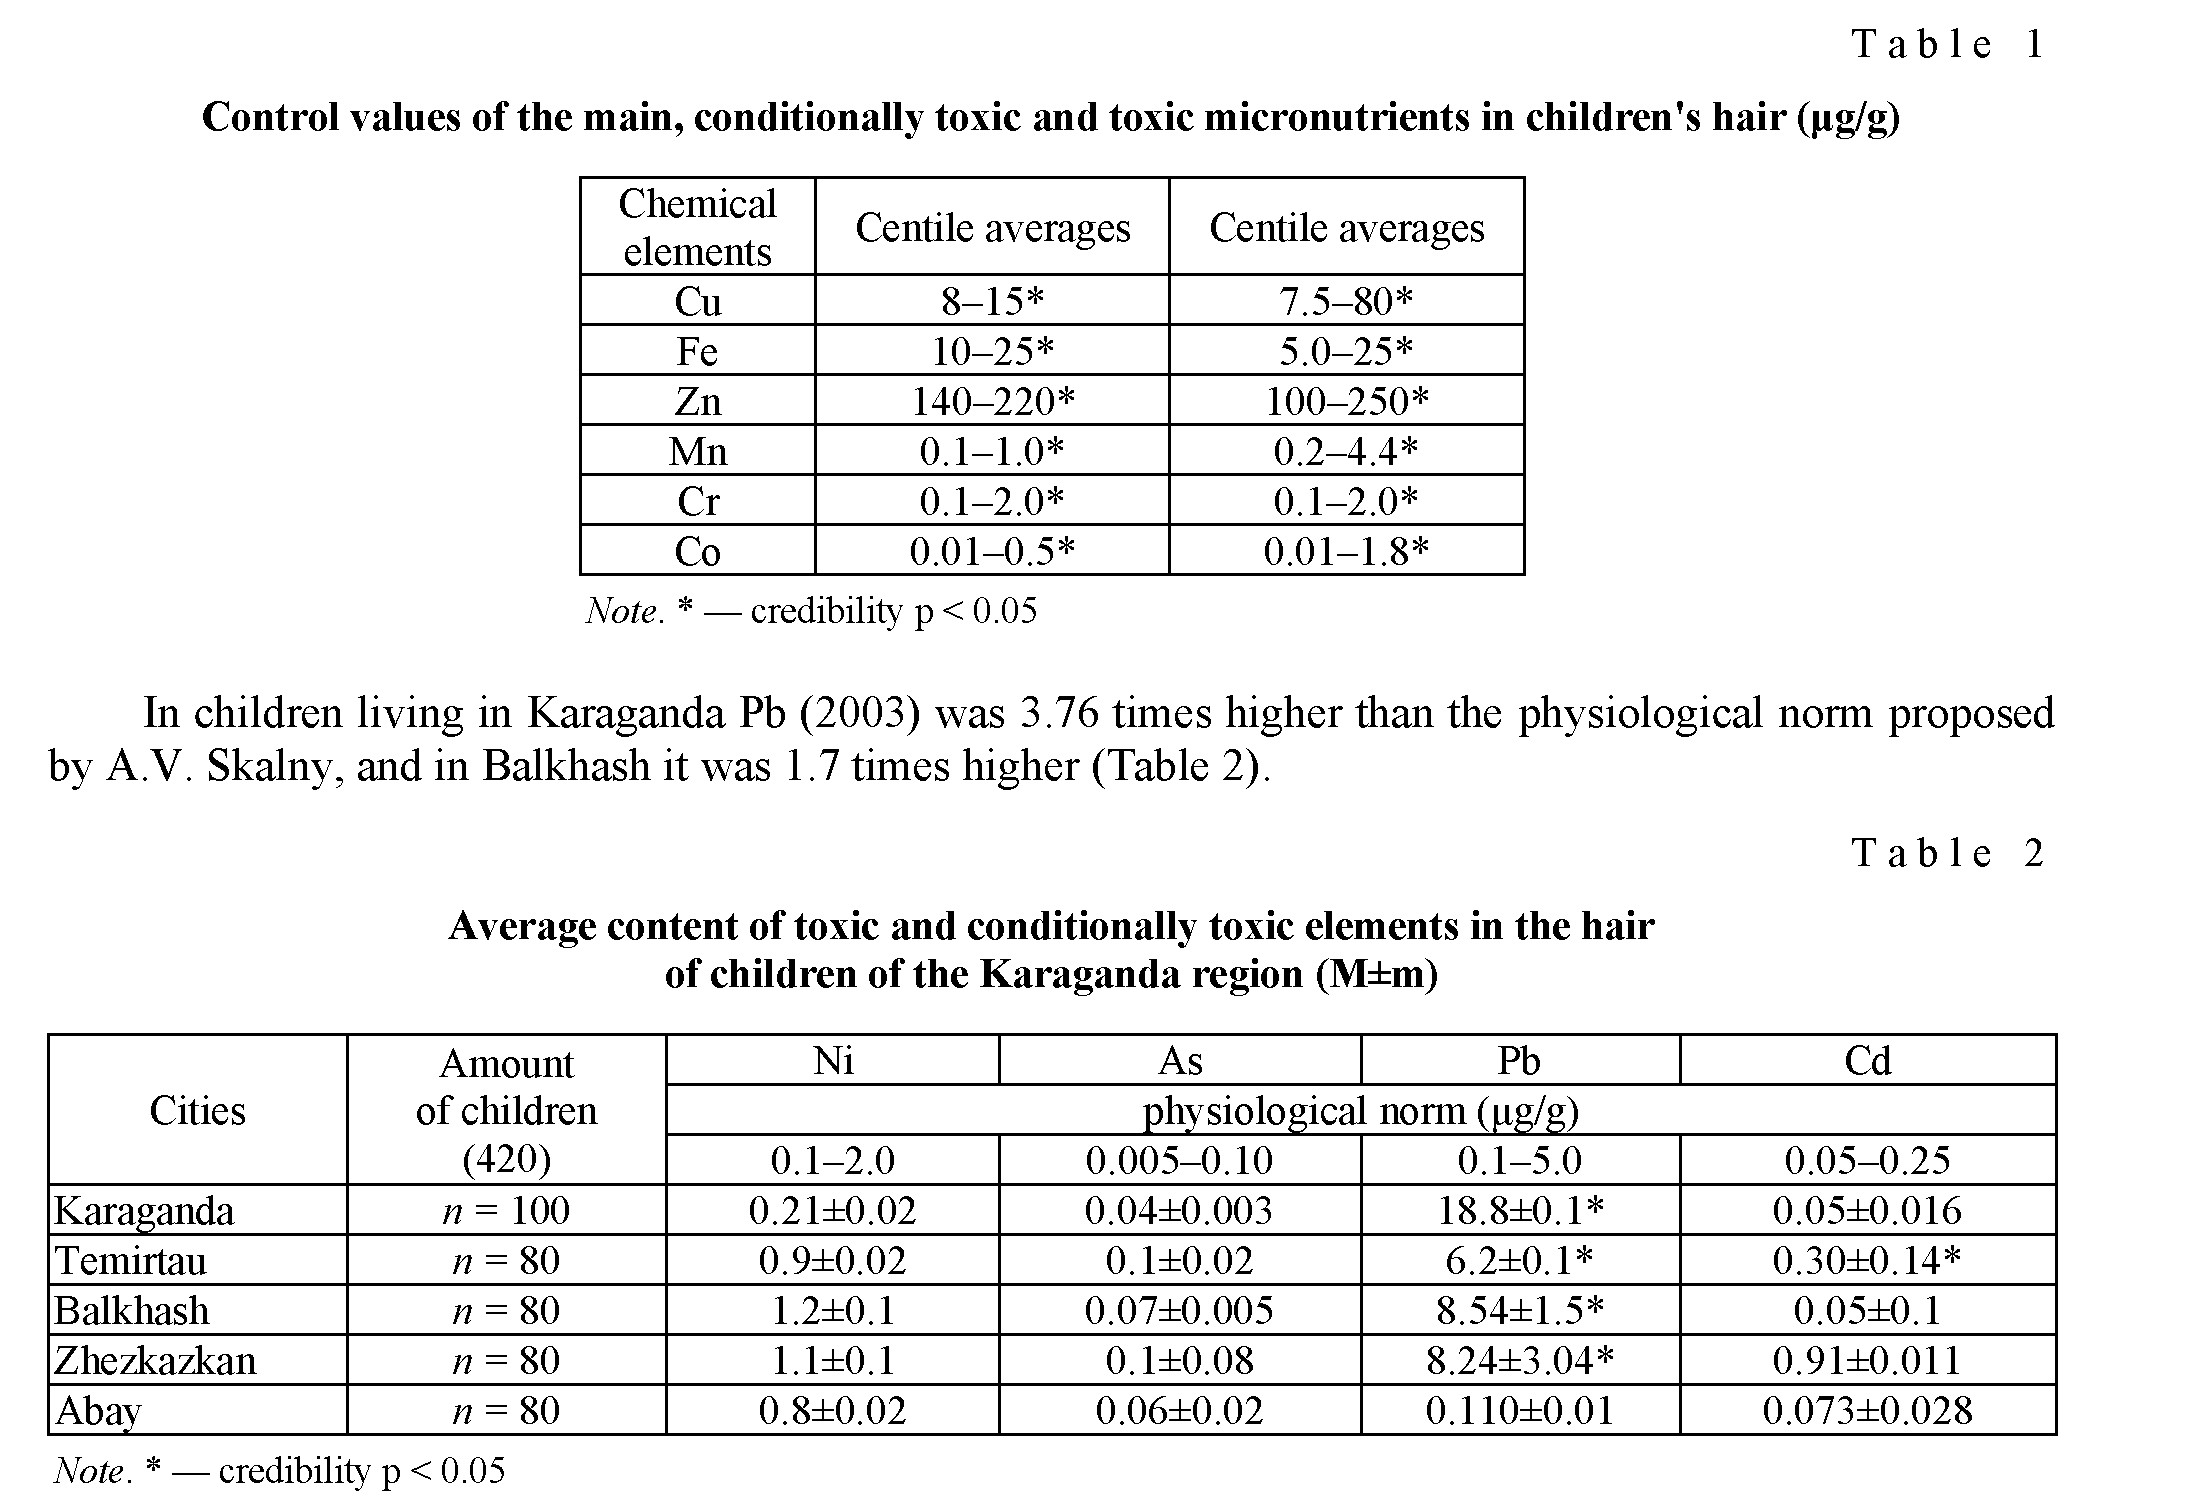 Composition of chemical elements in the biosubstrate (hair) of children of the Karaganda region